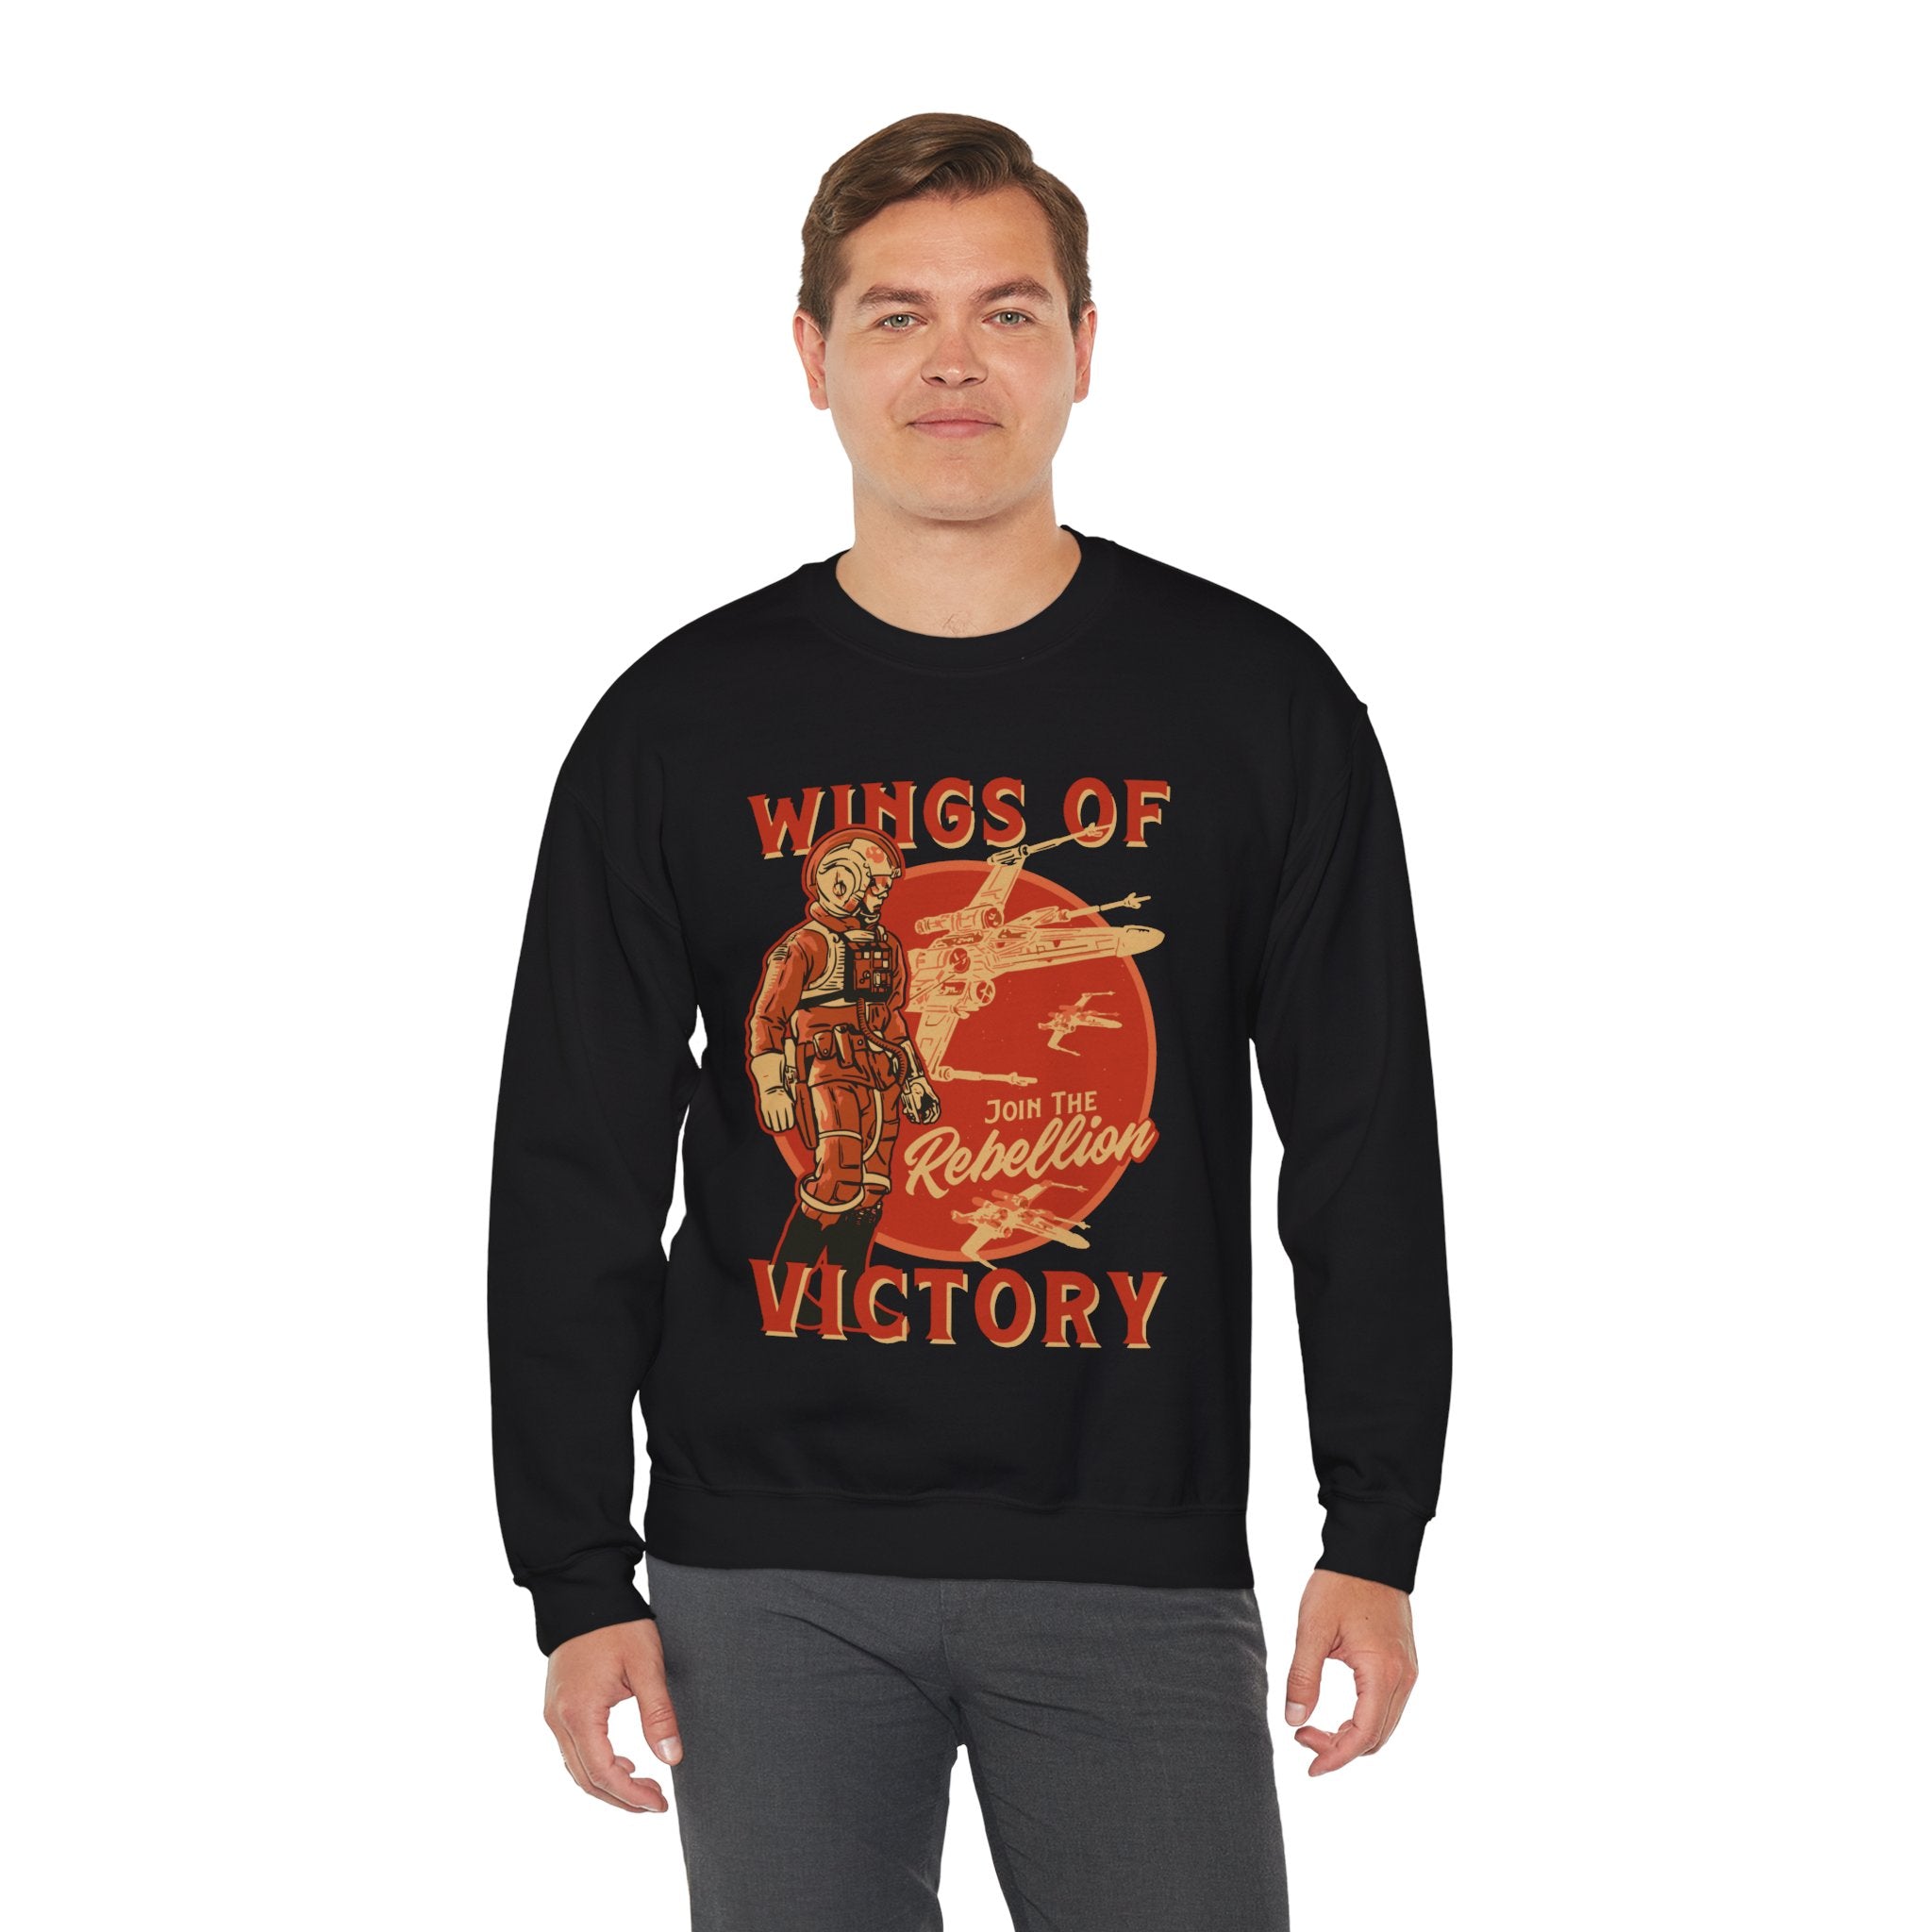 A person wearing a comfortable black Wings of Victory - Sweatshirt with a "Join the Rebellion" design featuring a fighter pilot and spacecraft.